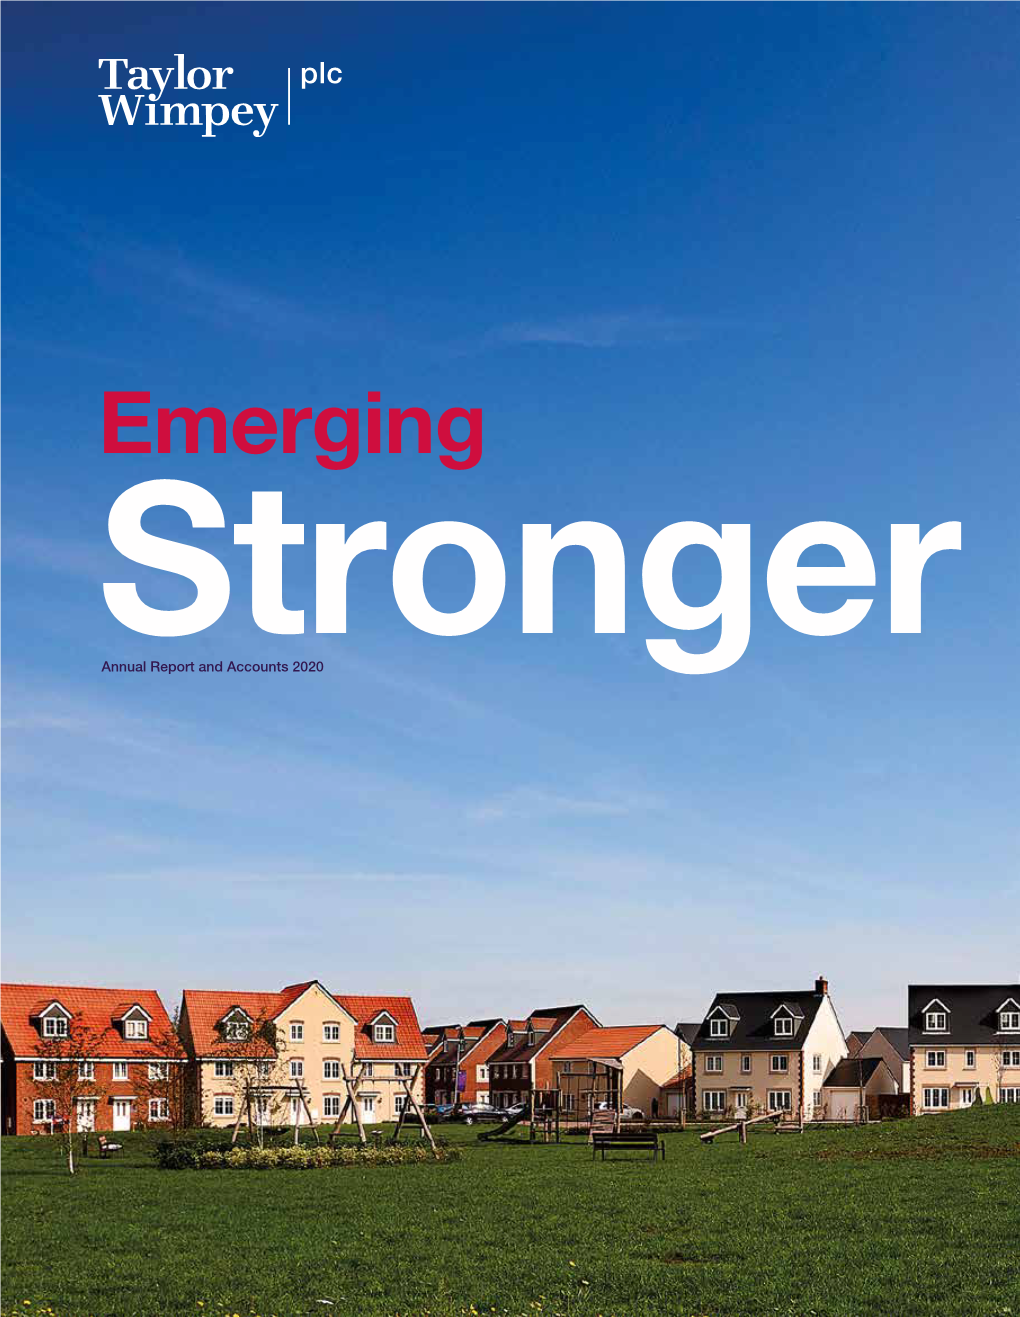 Taylor Wimpey Annual Report and Accounts 2020